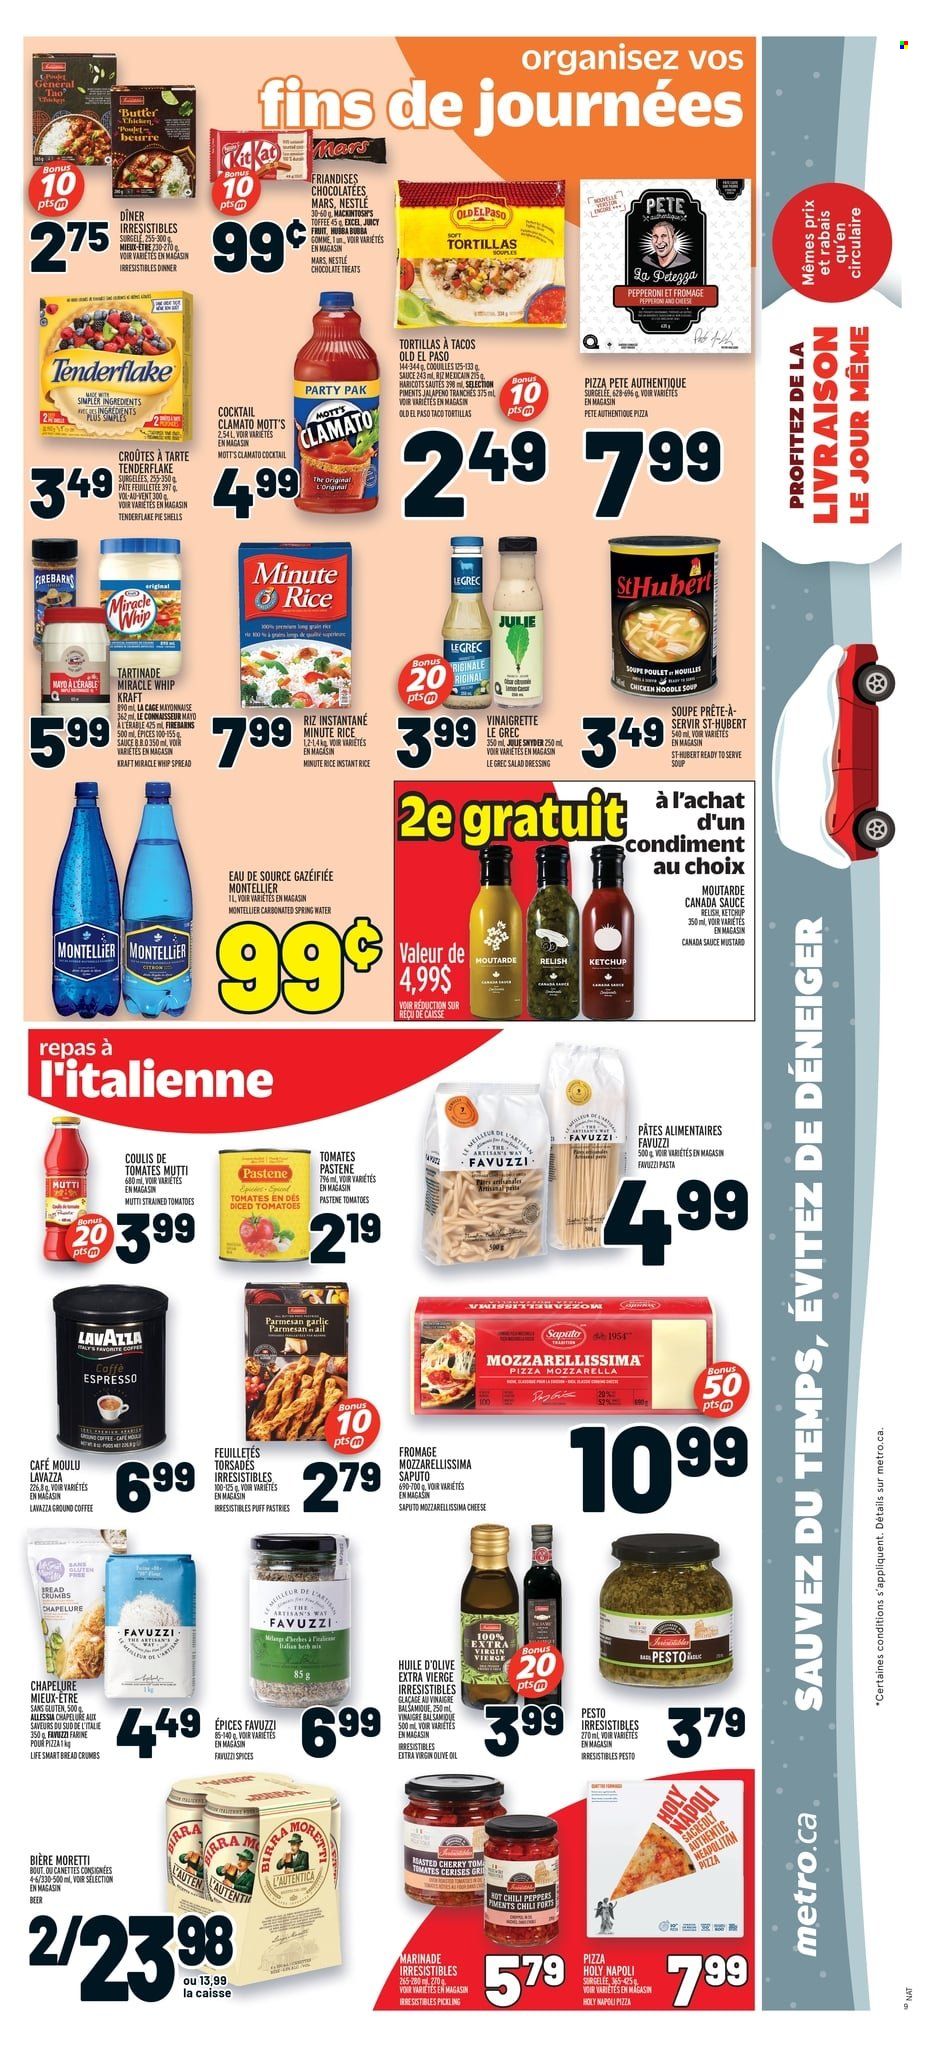 thumbnail - Metro Flyer - January 26, 2023 - February 01, 2023 - Sales products - tortillas, Old El Paso, tacos, chili peppers, jalapeño, cherries, Mott's, pizza, soup, pasta, noodles cup, noodles, Kraft®, pepperoni, mayonnaise, Miracle Whip, chocolate, Mars, toffee, diced tomatoes, rice, mustard, salad dressing, vinaigrette dressing, dressing, marinade, extra virgin olive oil, olive oil, oil, Clamato, spring water, coffee, ground coffee, Lavazza, beer, cage, Nestlé, ketchup, pesto. Page 8.